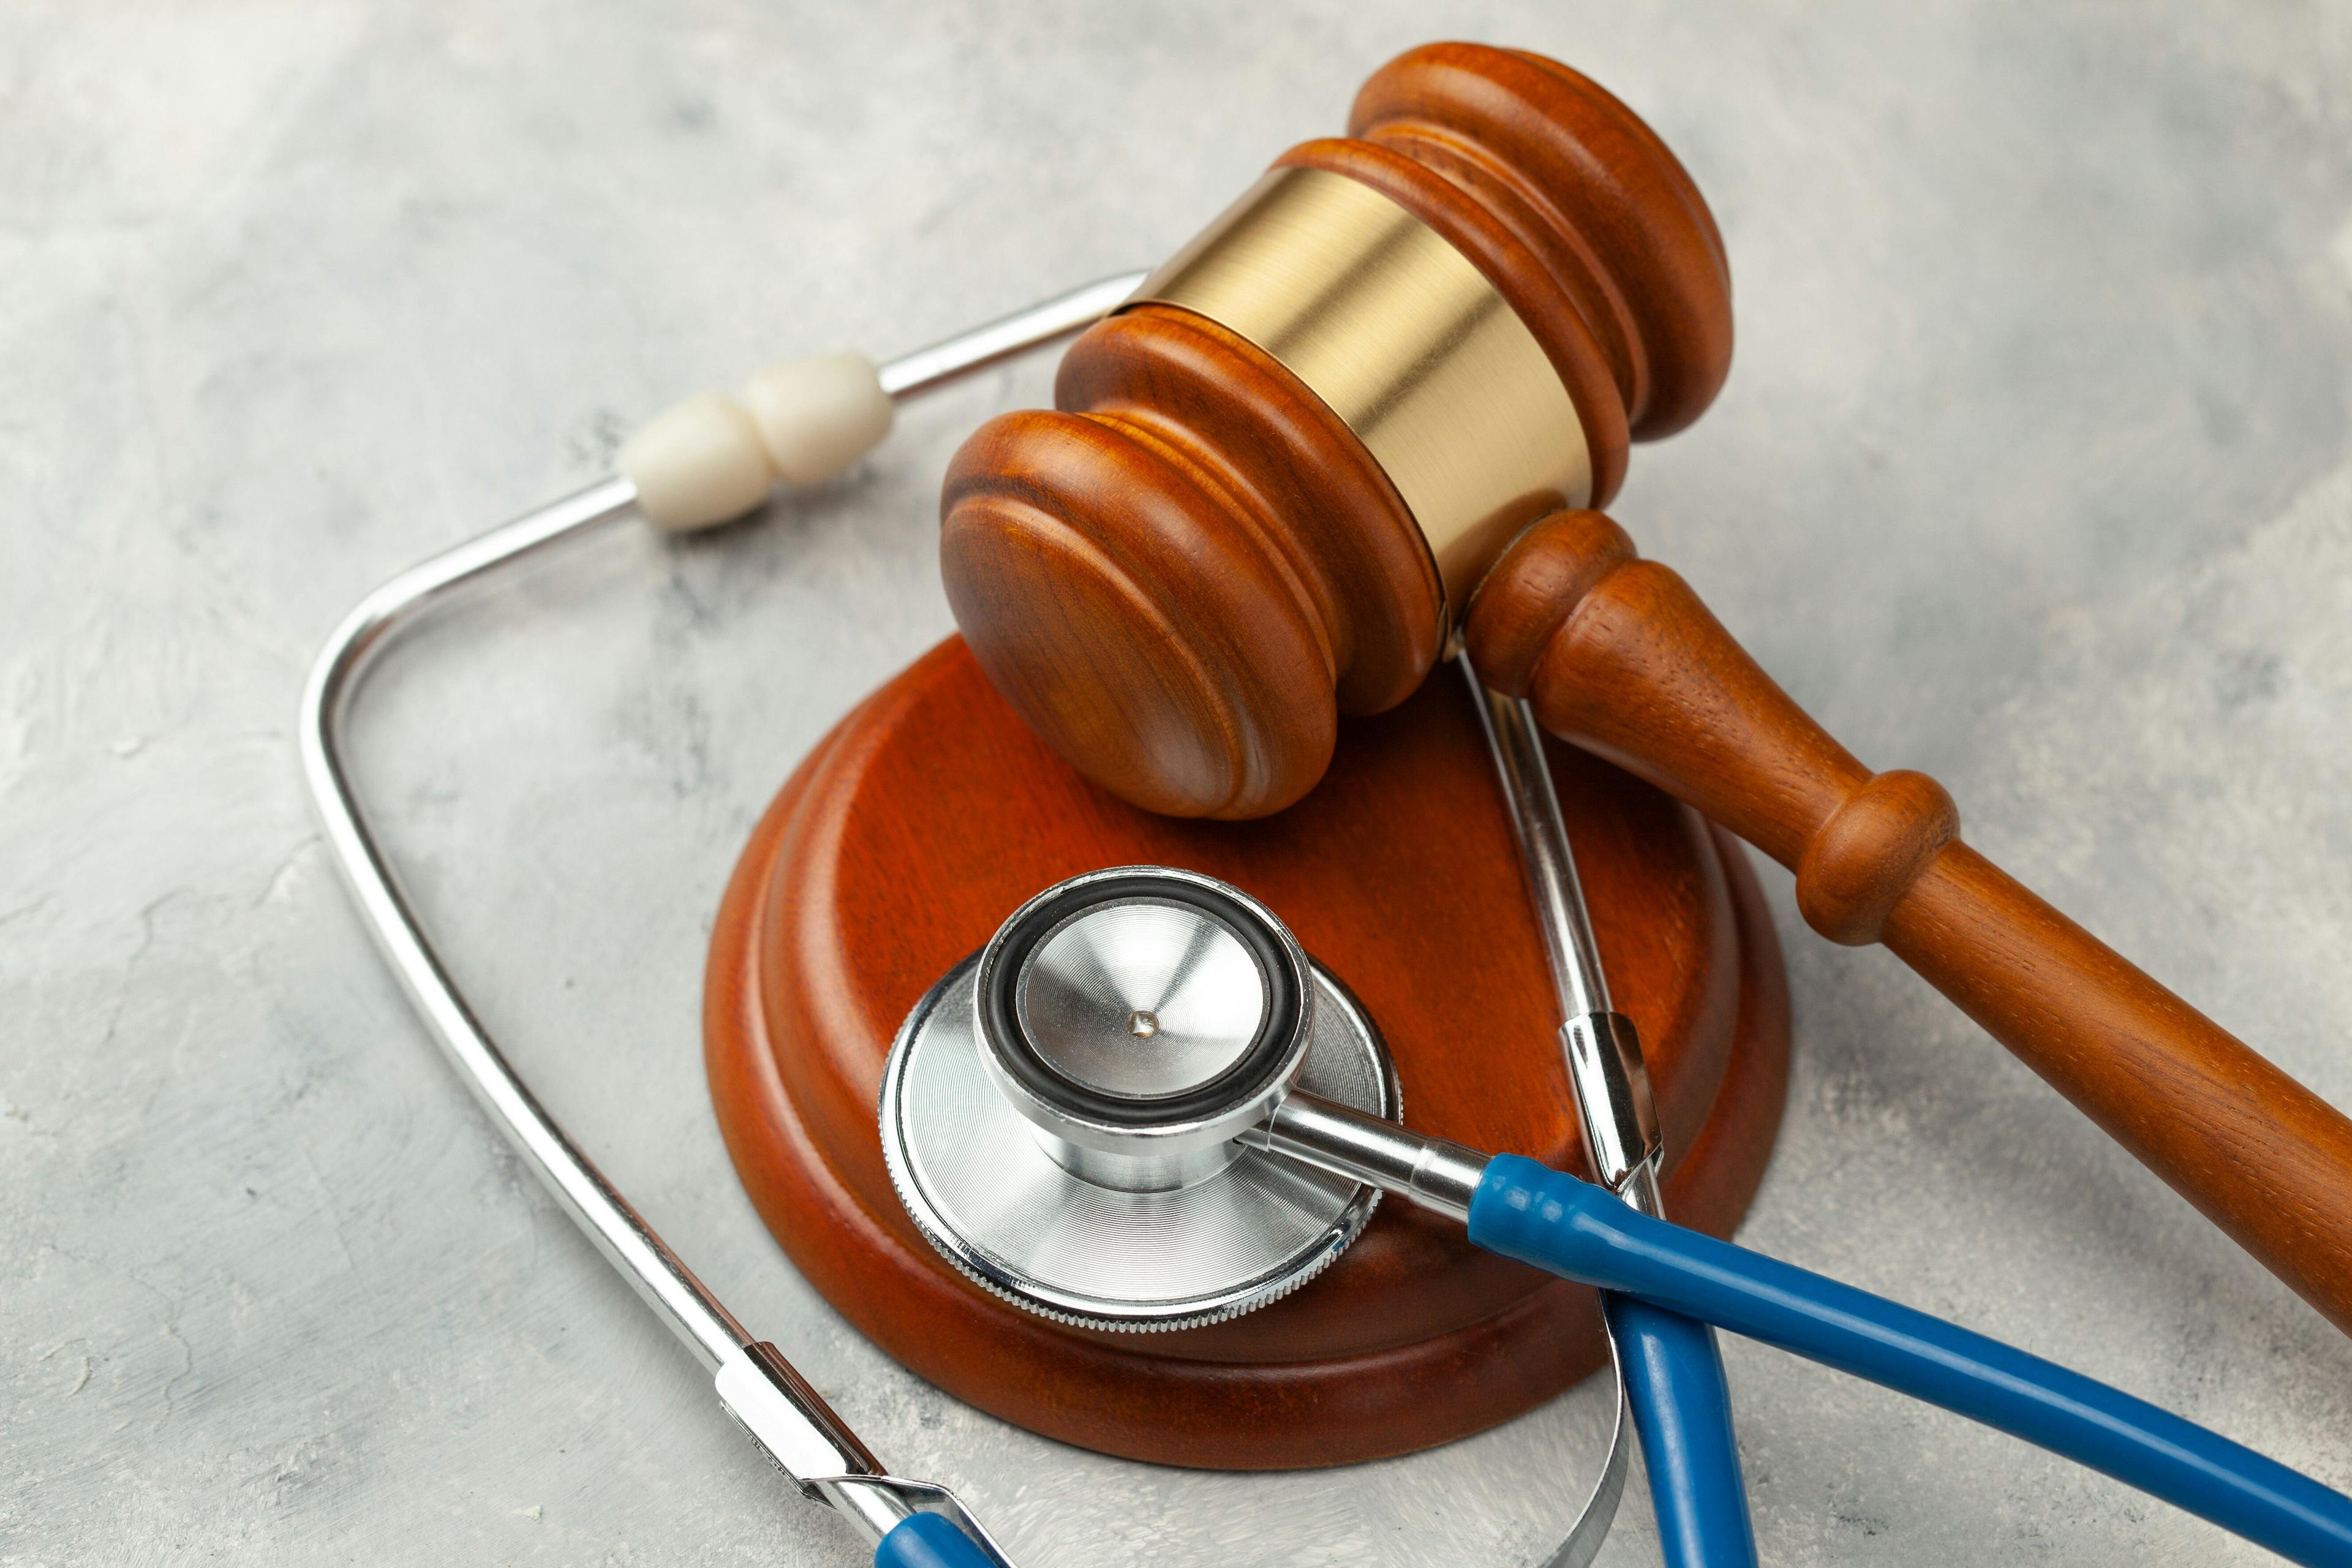 Feds settle five HIPAA right of access cases